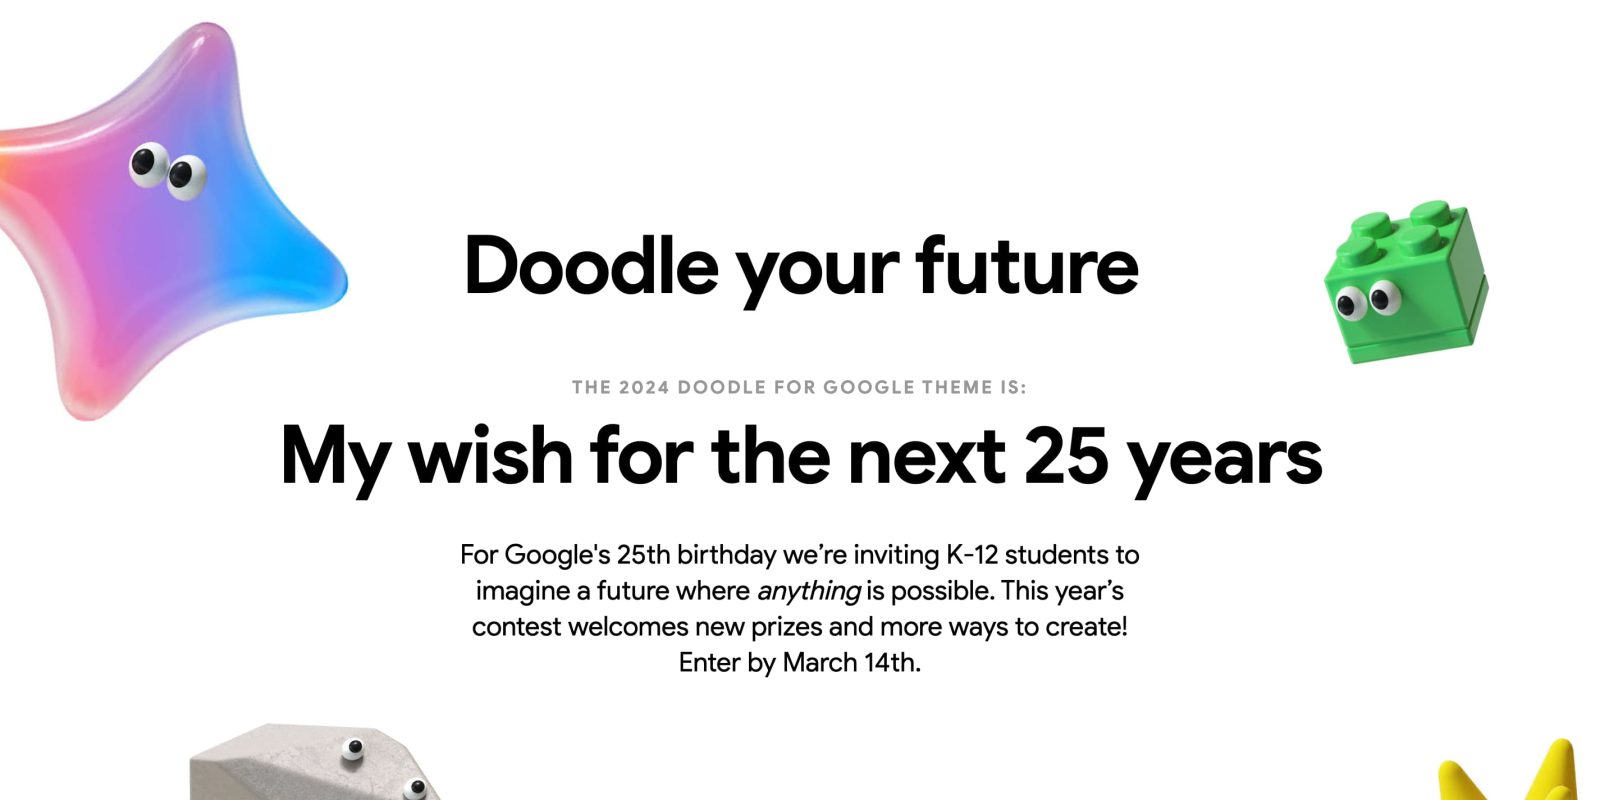 Doodle for Google 2024 opens 'My wish for the next 25 years'